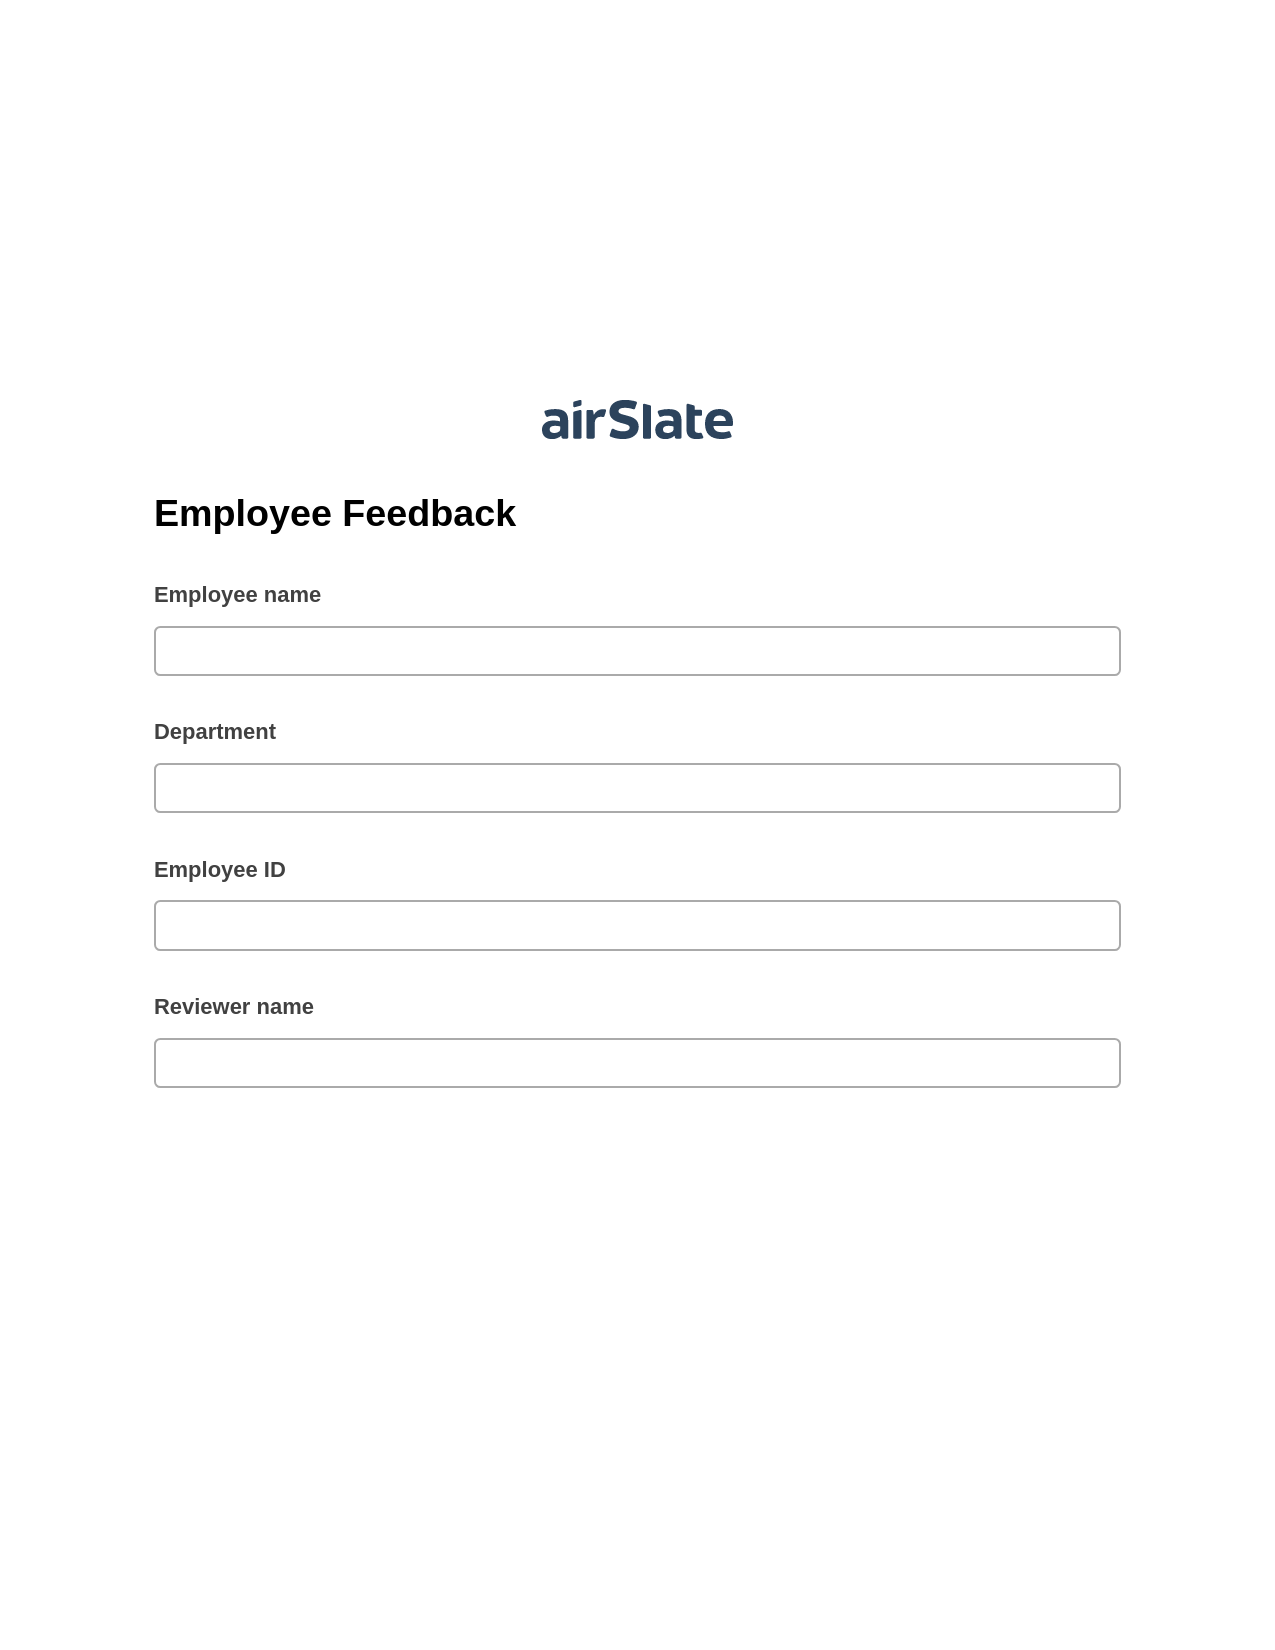 Employee Feedback Pre-fill from Salesforce Record Bot, Email Notification Bot, Box Bot